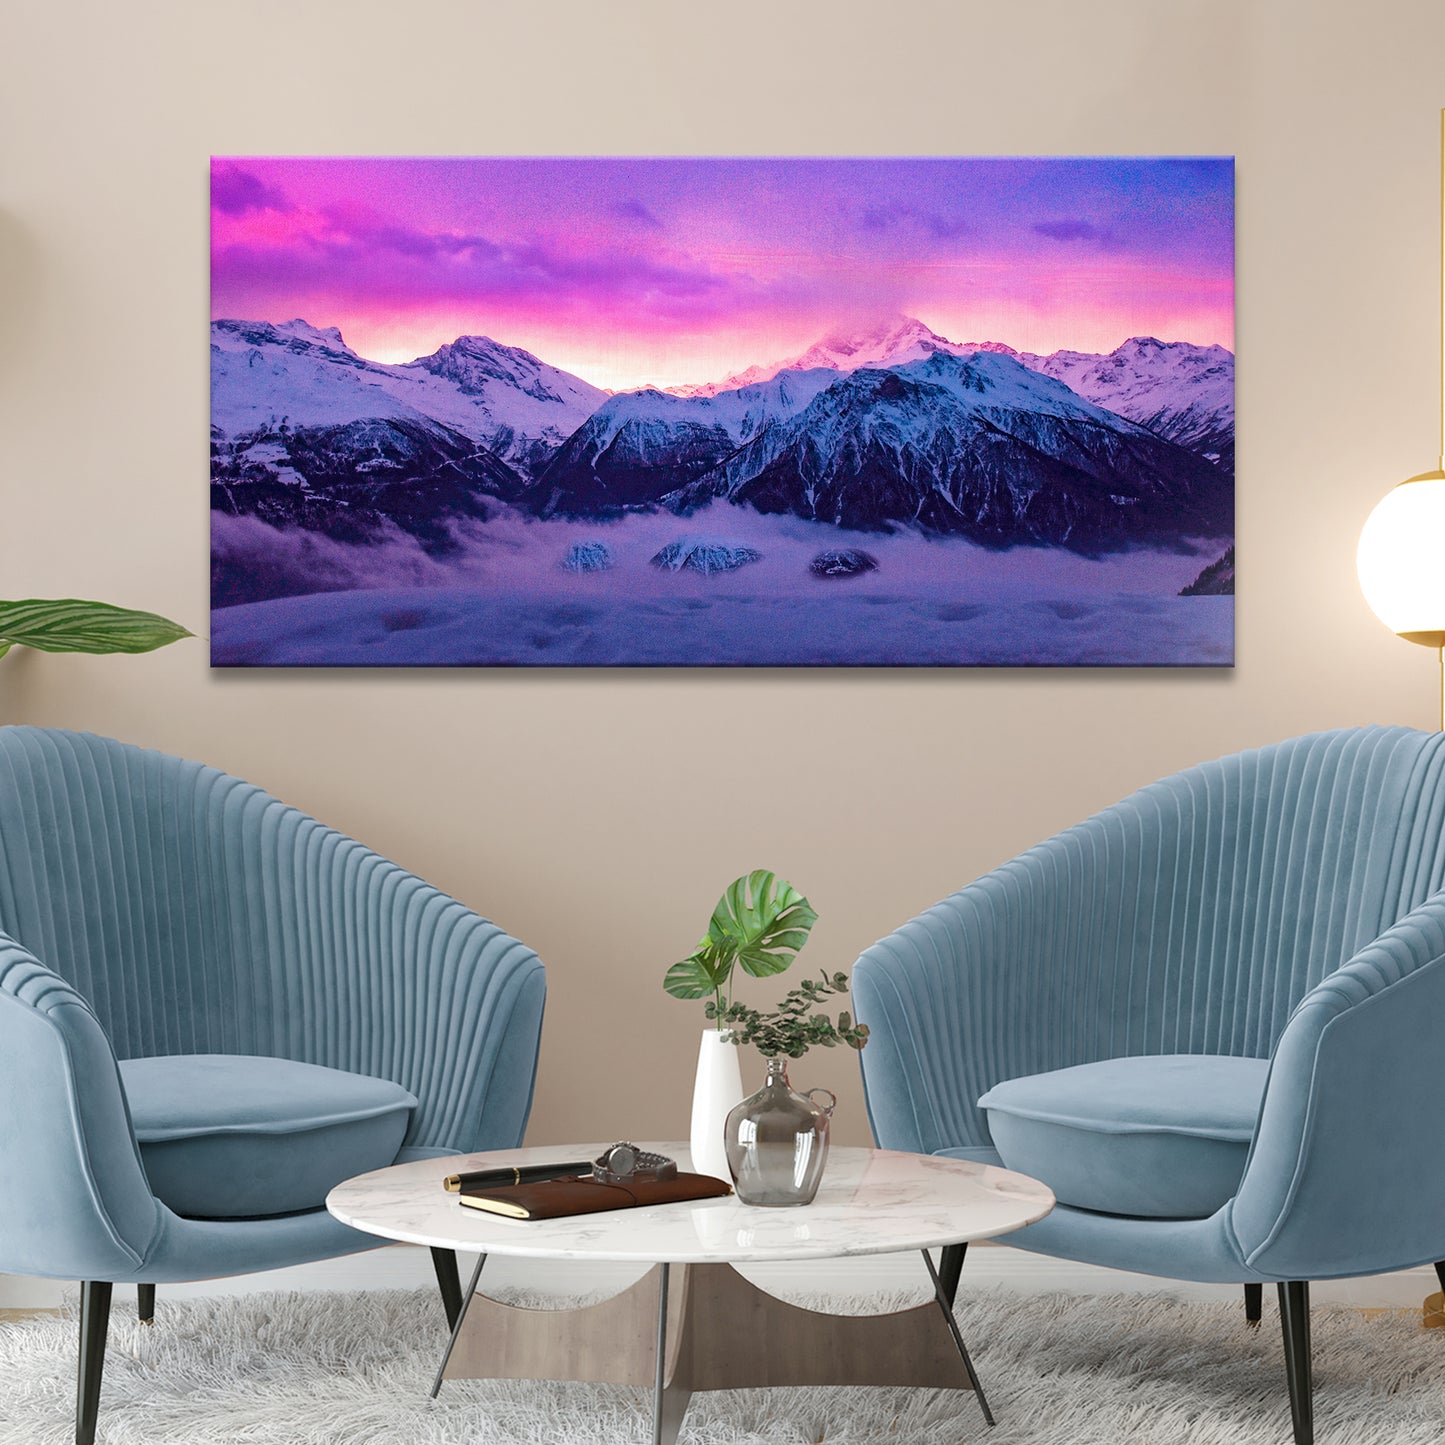 Pink Sky Over Snowy Mountains Canvas Wall Art Style 2 - Image by Tailored Canvases